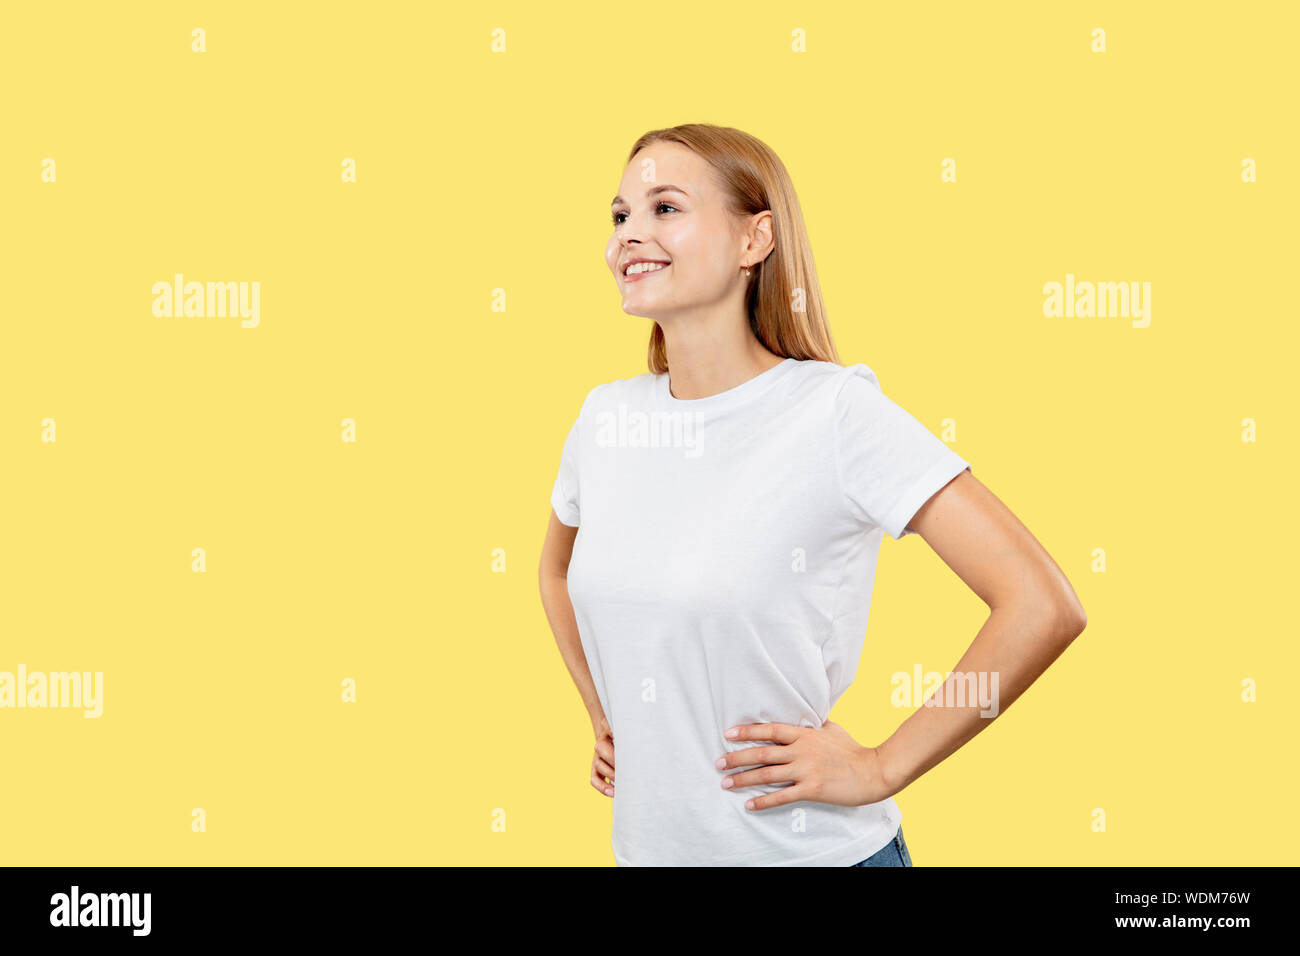 Caucasian young woman's half-length portrait on yellow studio background. Beautiful female model in white shirt. Concept of human emotions, facial expression. Smiling and standing with hands on hips. Stock Photo